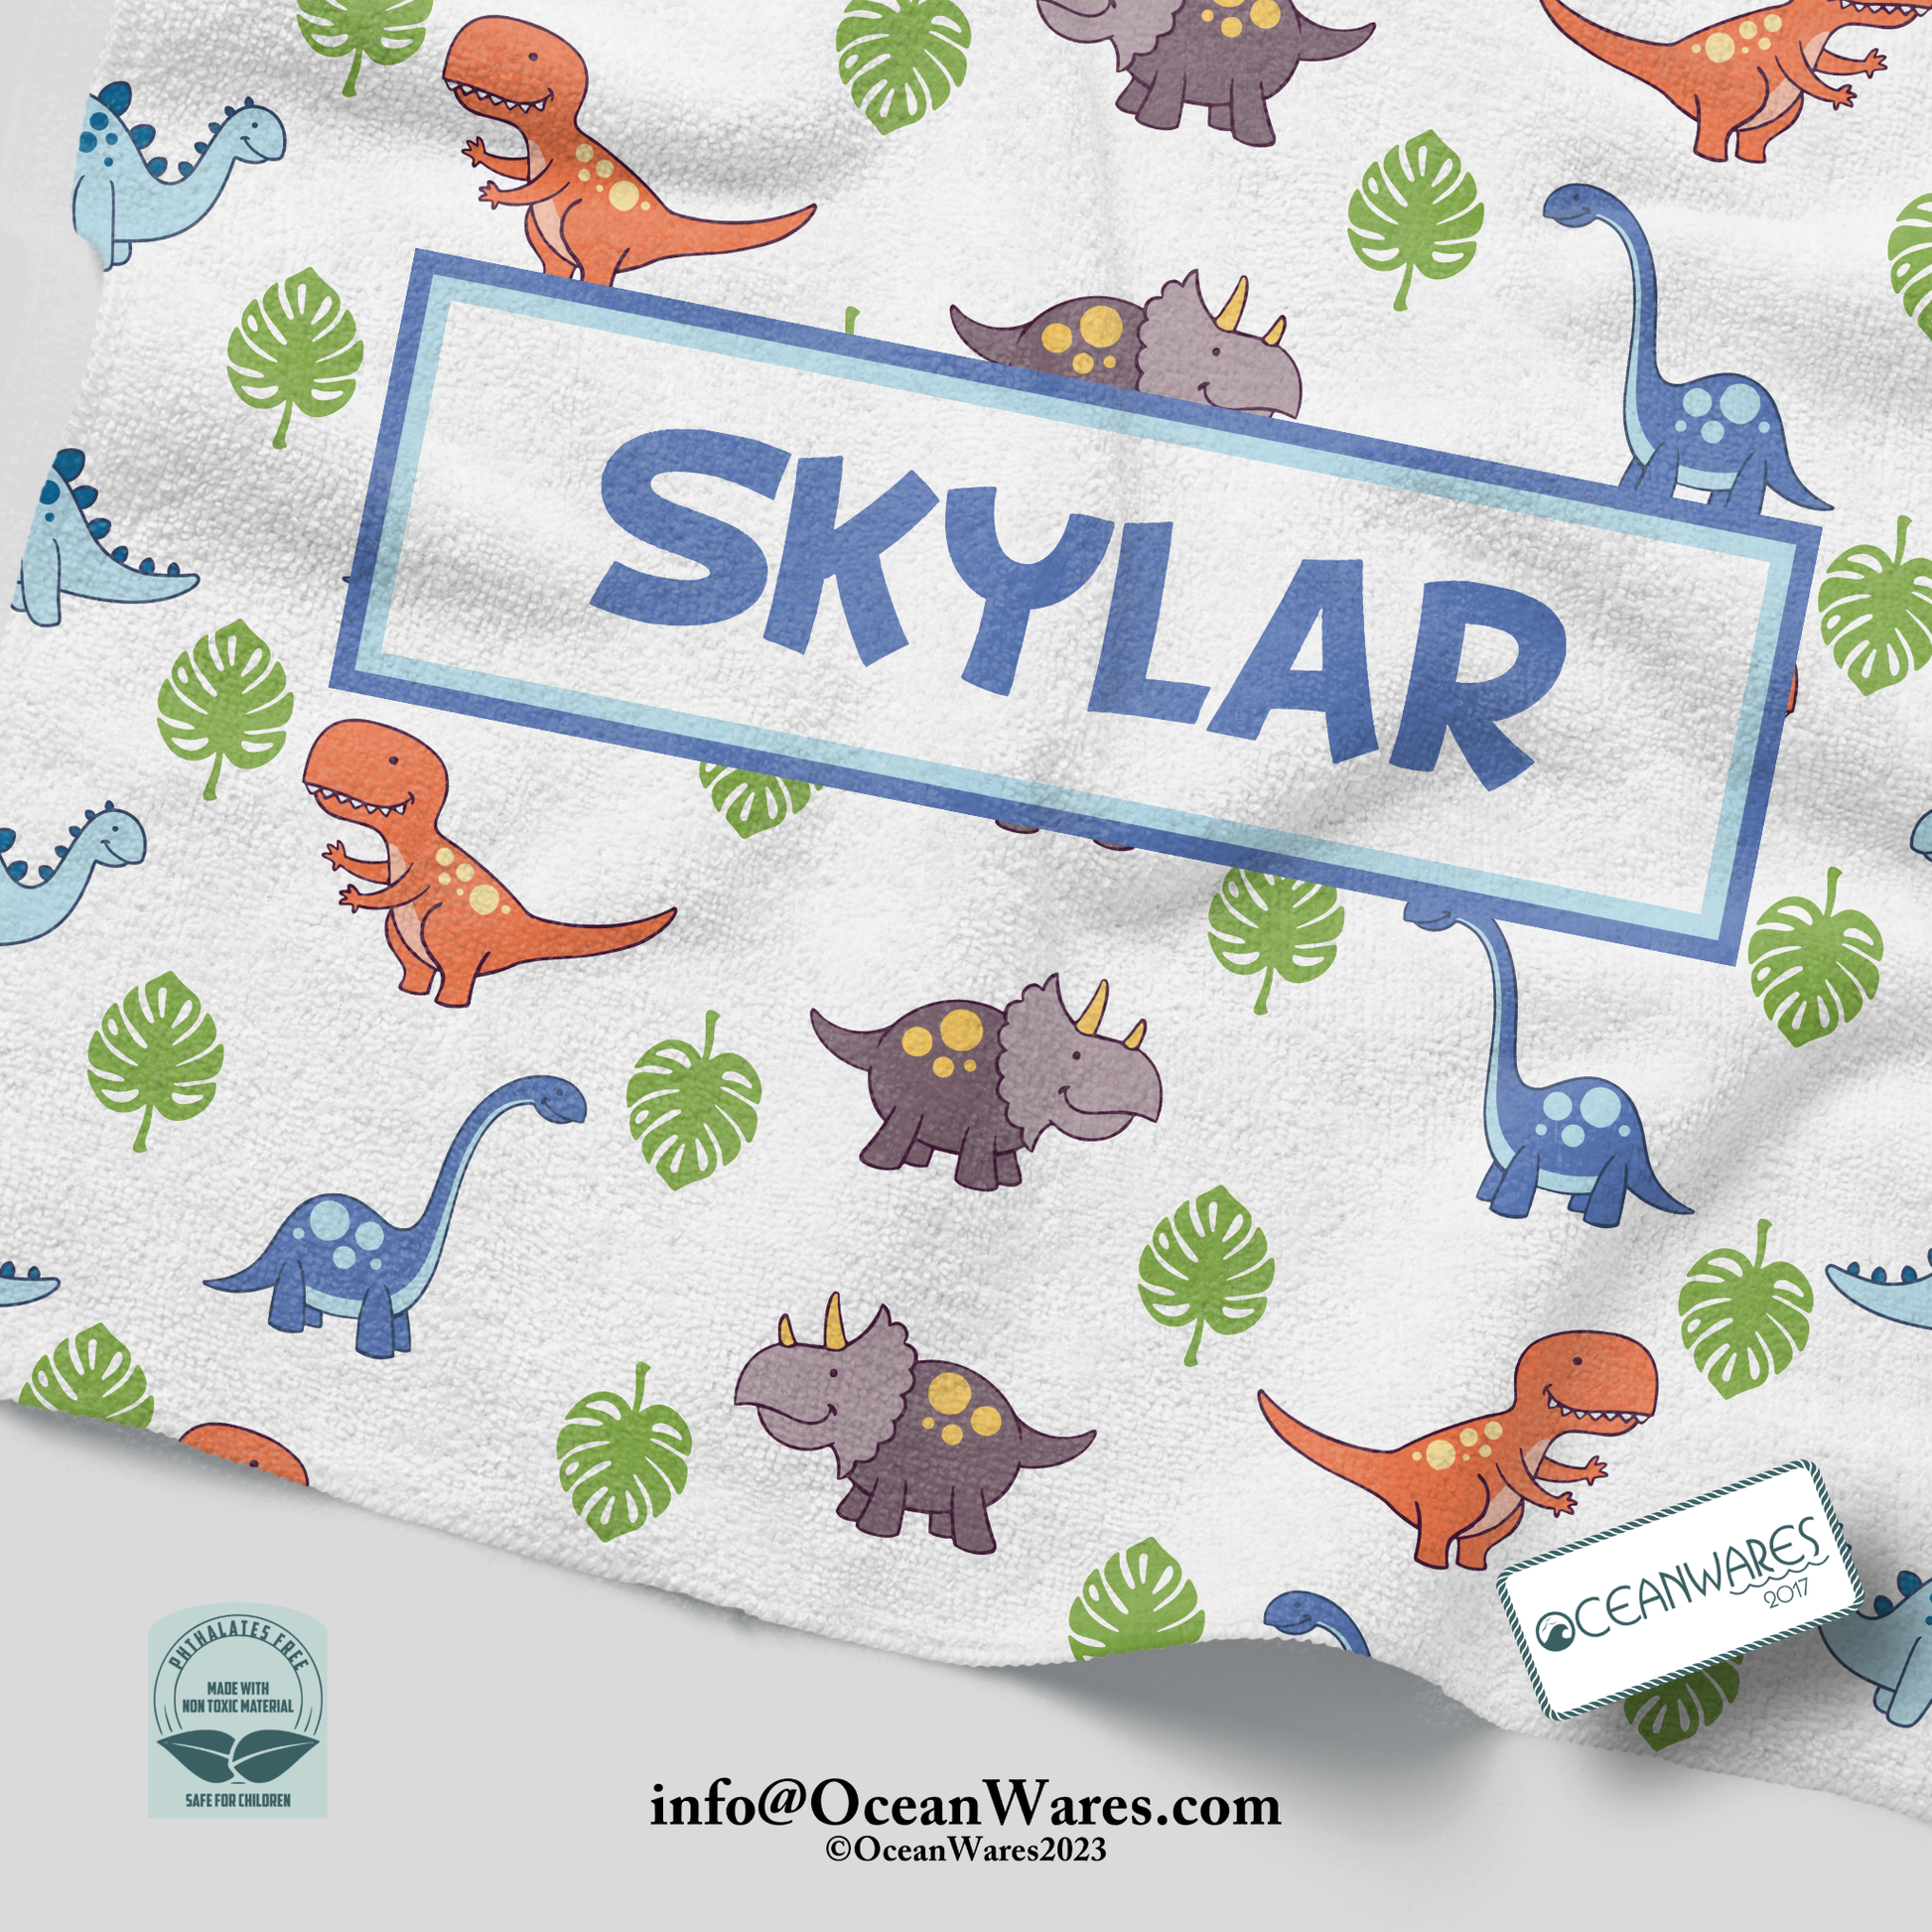 Personalized Kids' Custom Dinosaur Washcloth with Name - Fun and Eco-Friendly Bath Time.